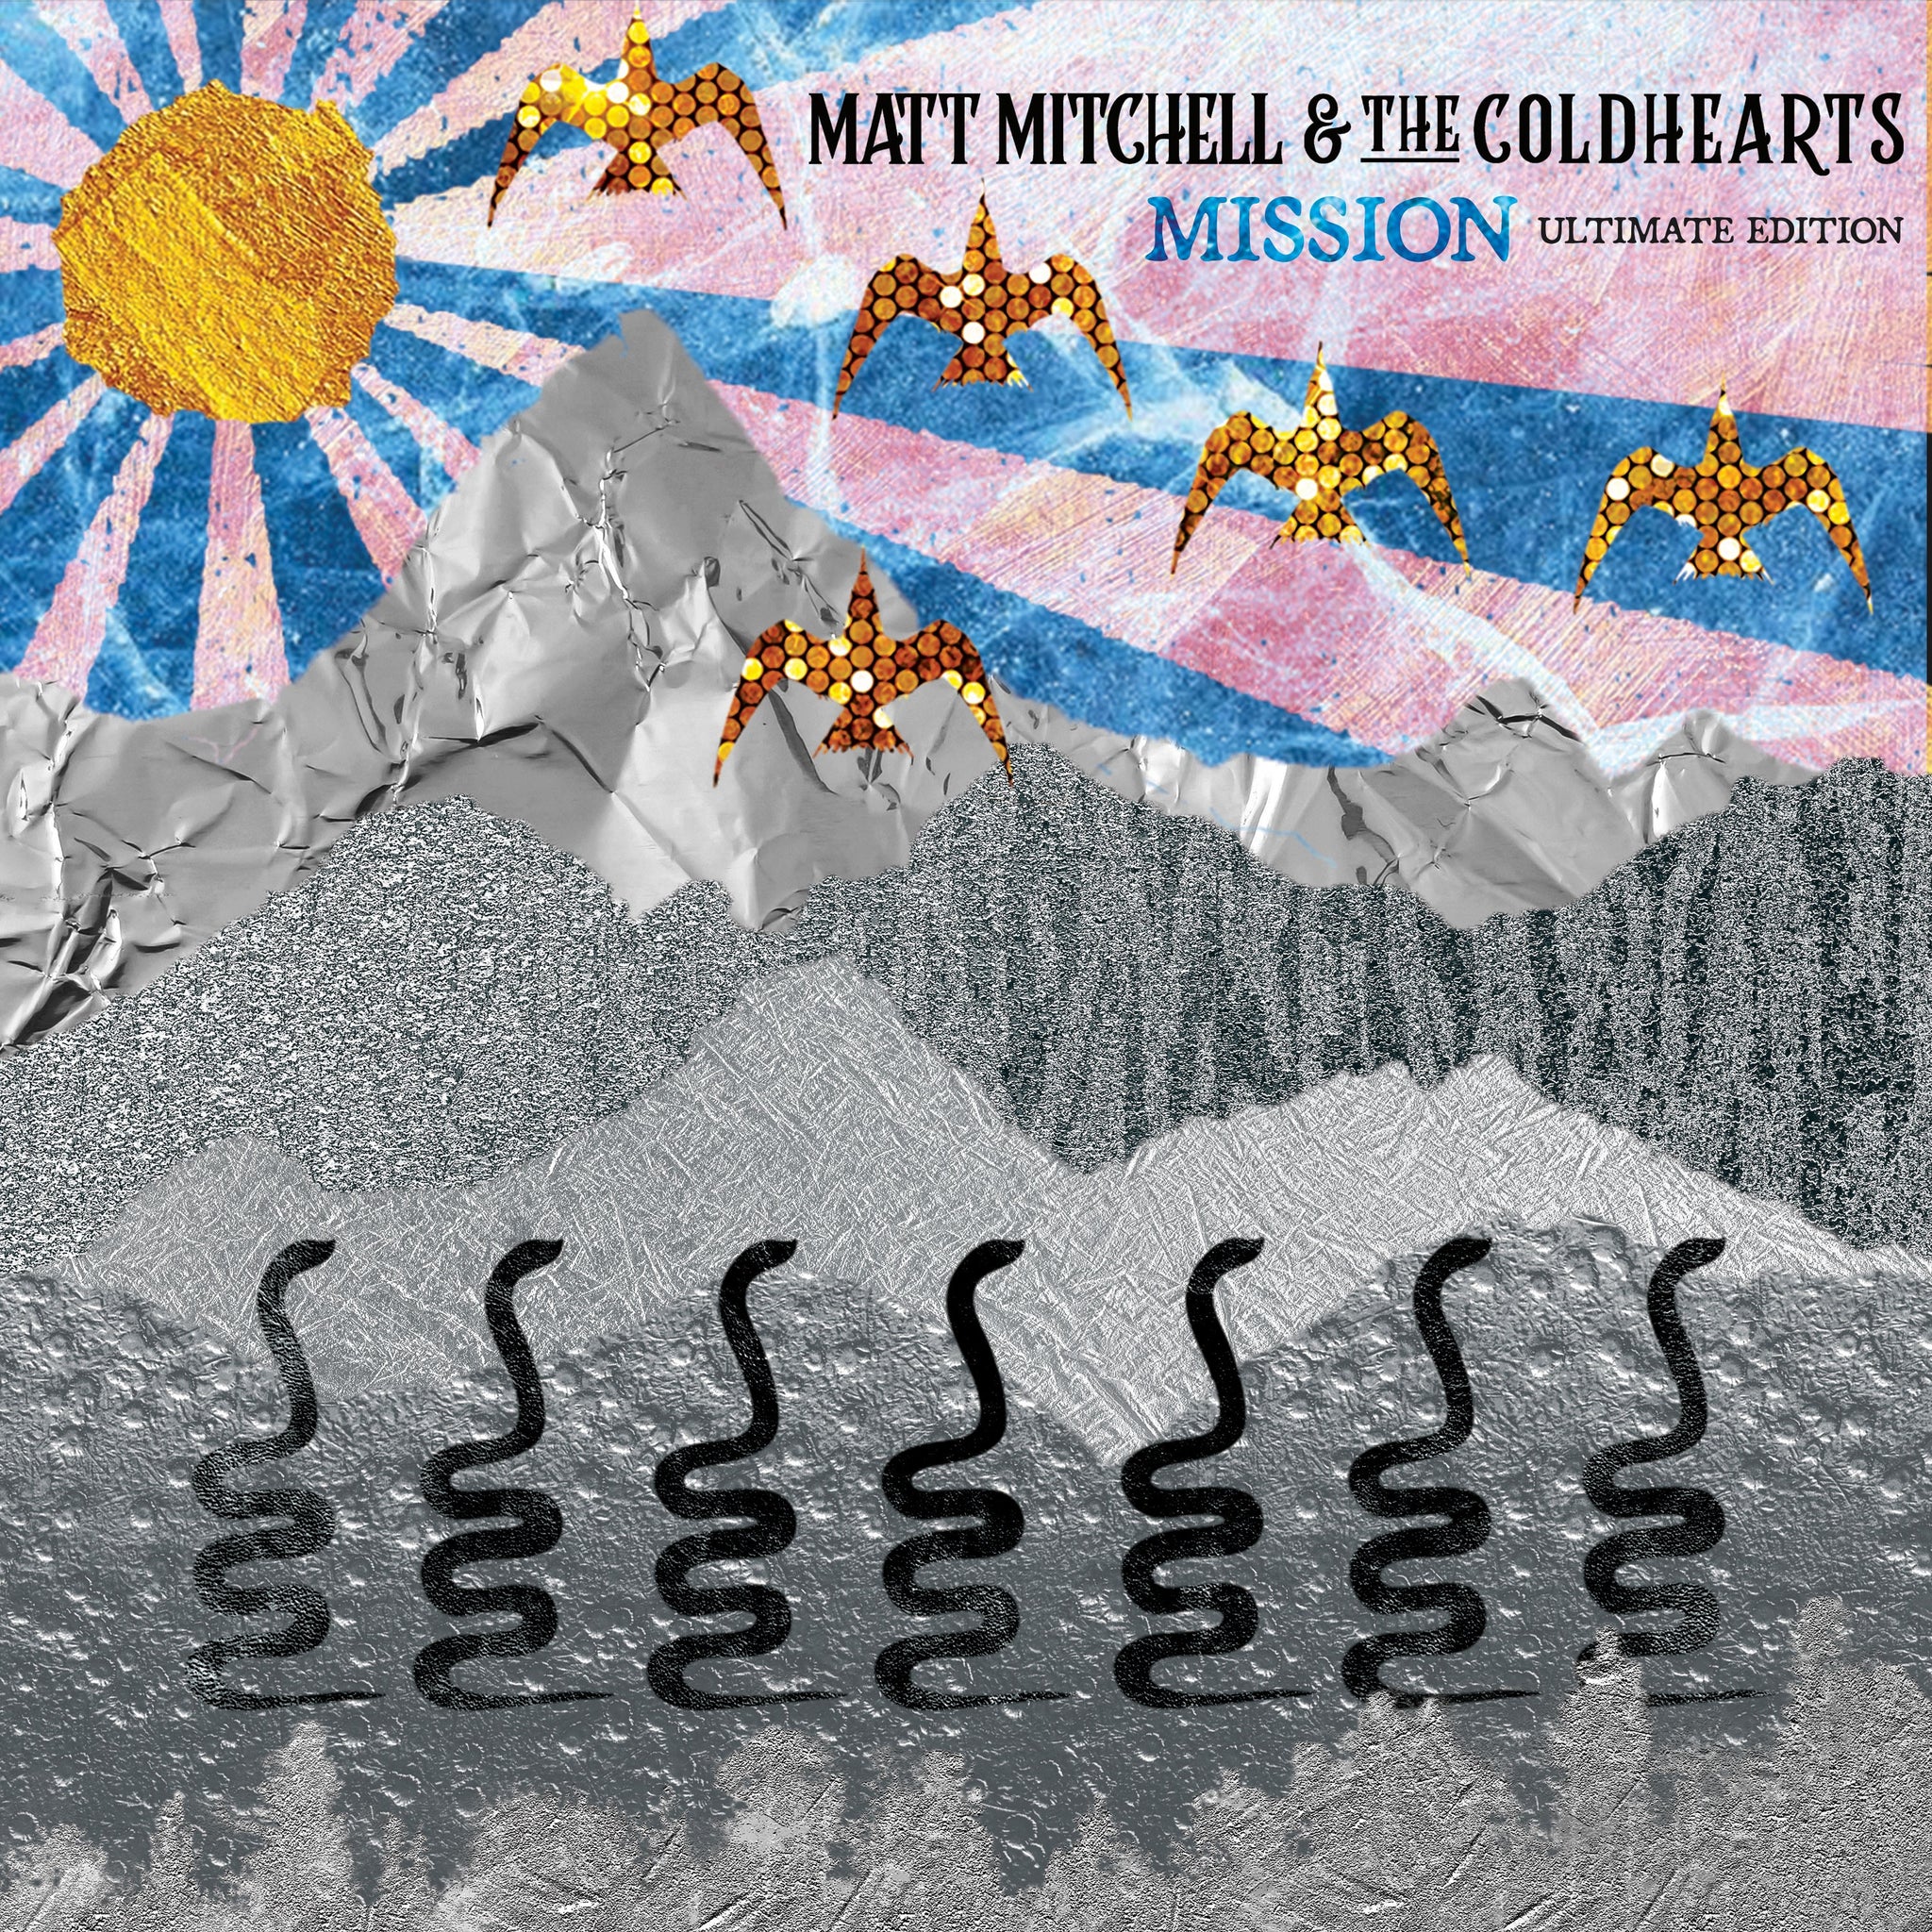 Matt Mitchell & The Coldhearts "Mission (Ultimate Edition)" Digital Download